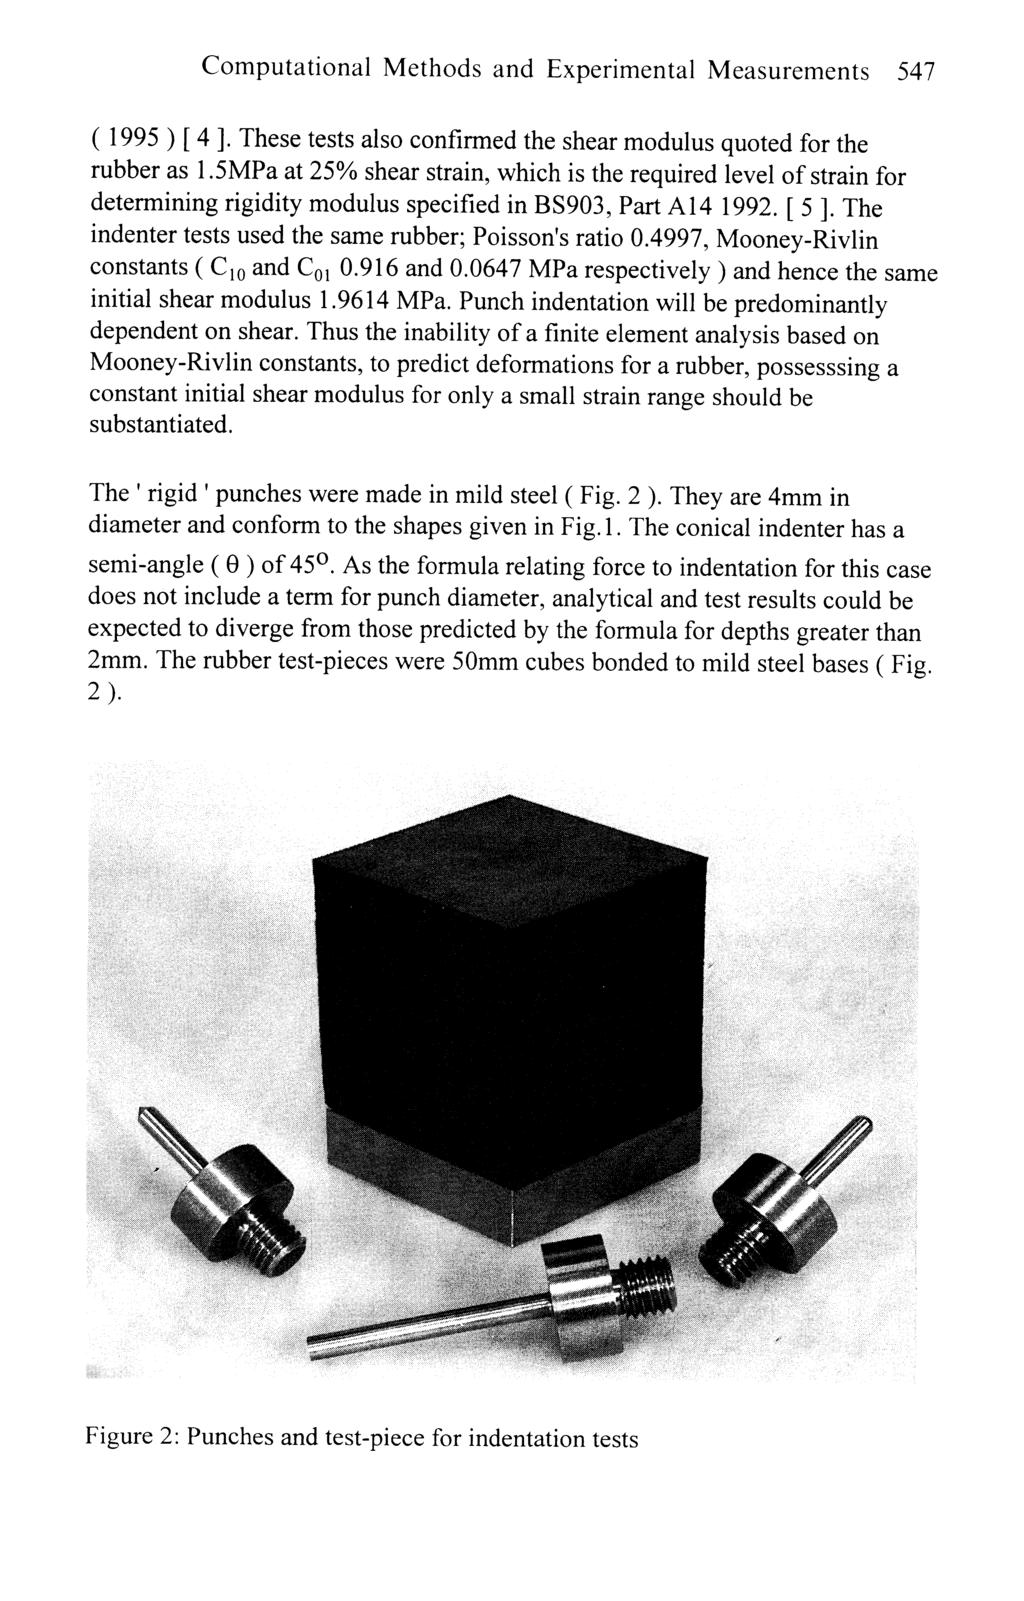 Computational Methods and Experimental Measurements 547 (1995) [4]. These tests also confirmed the shear modulus quoted for the rubber as 1.